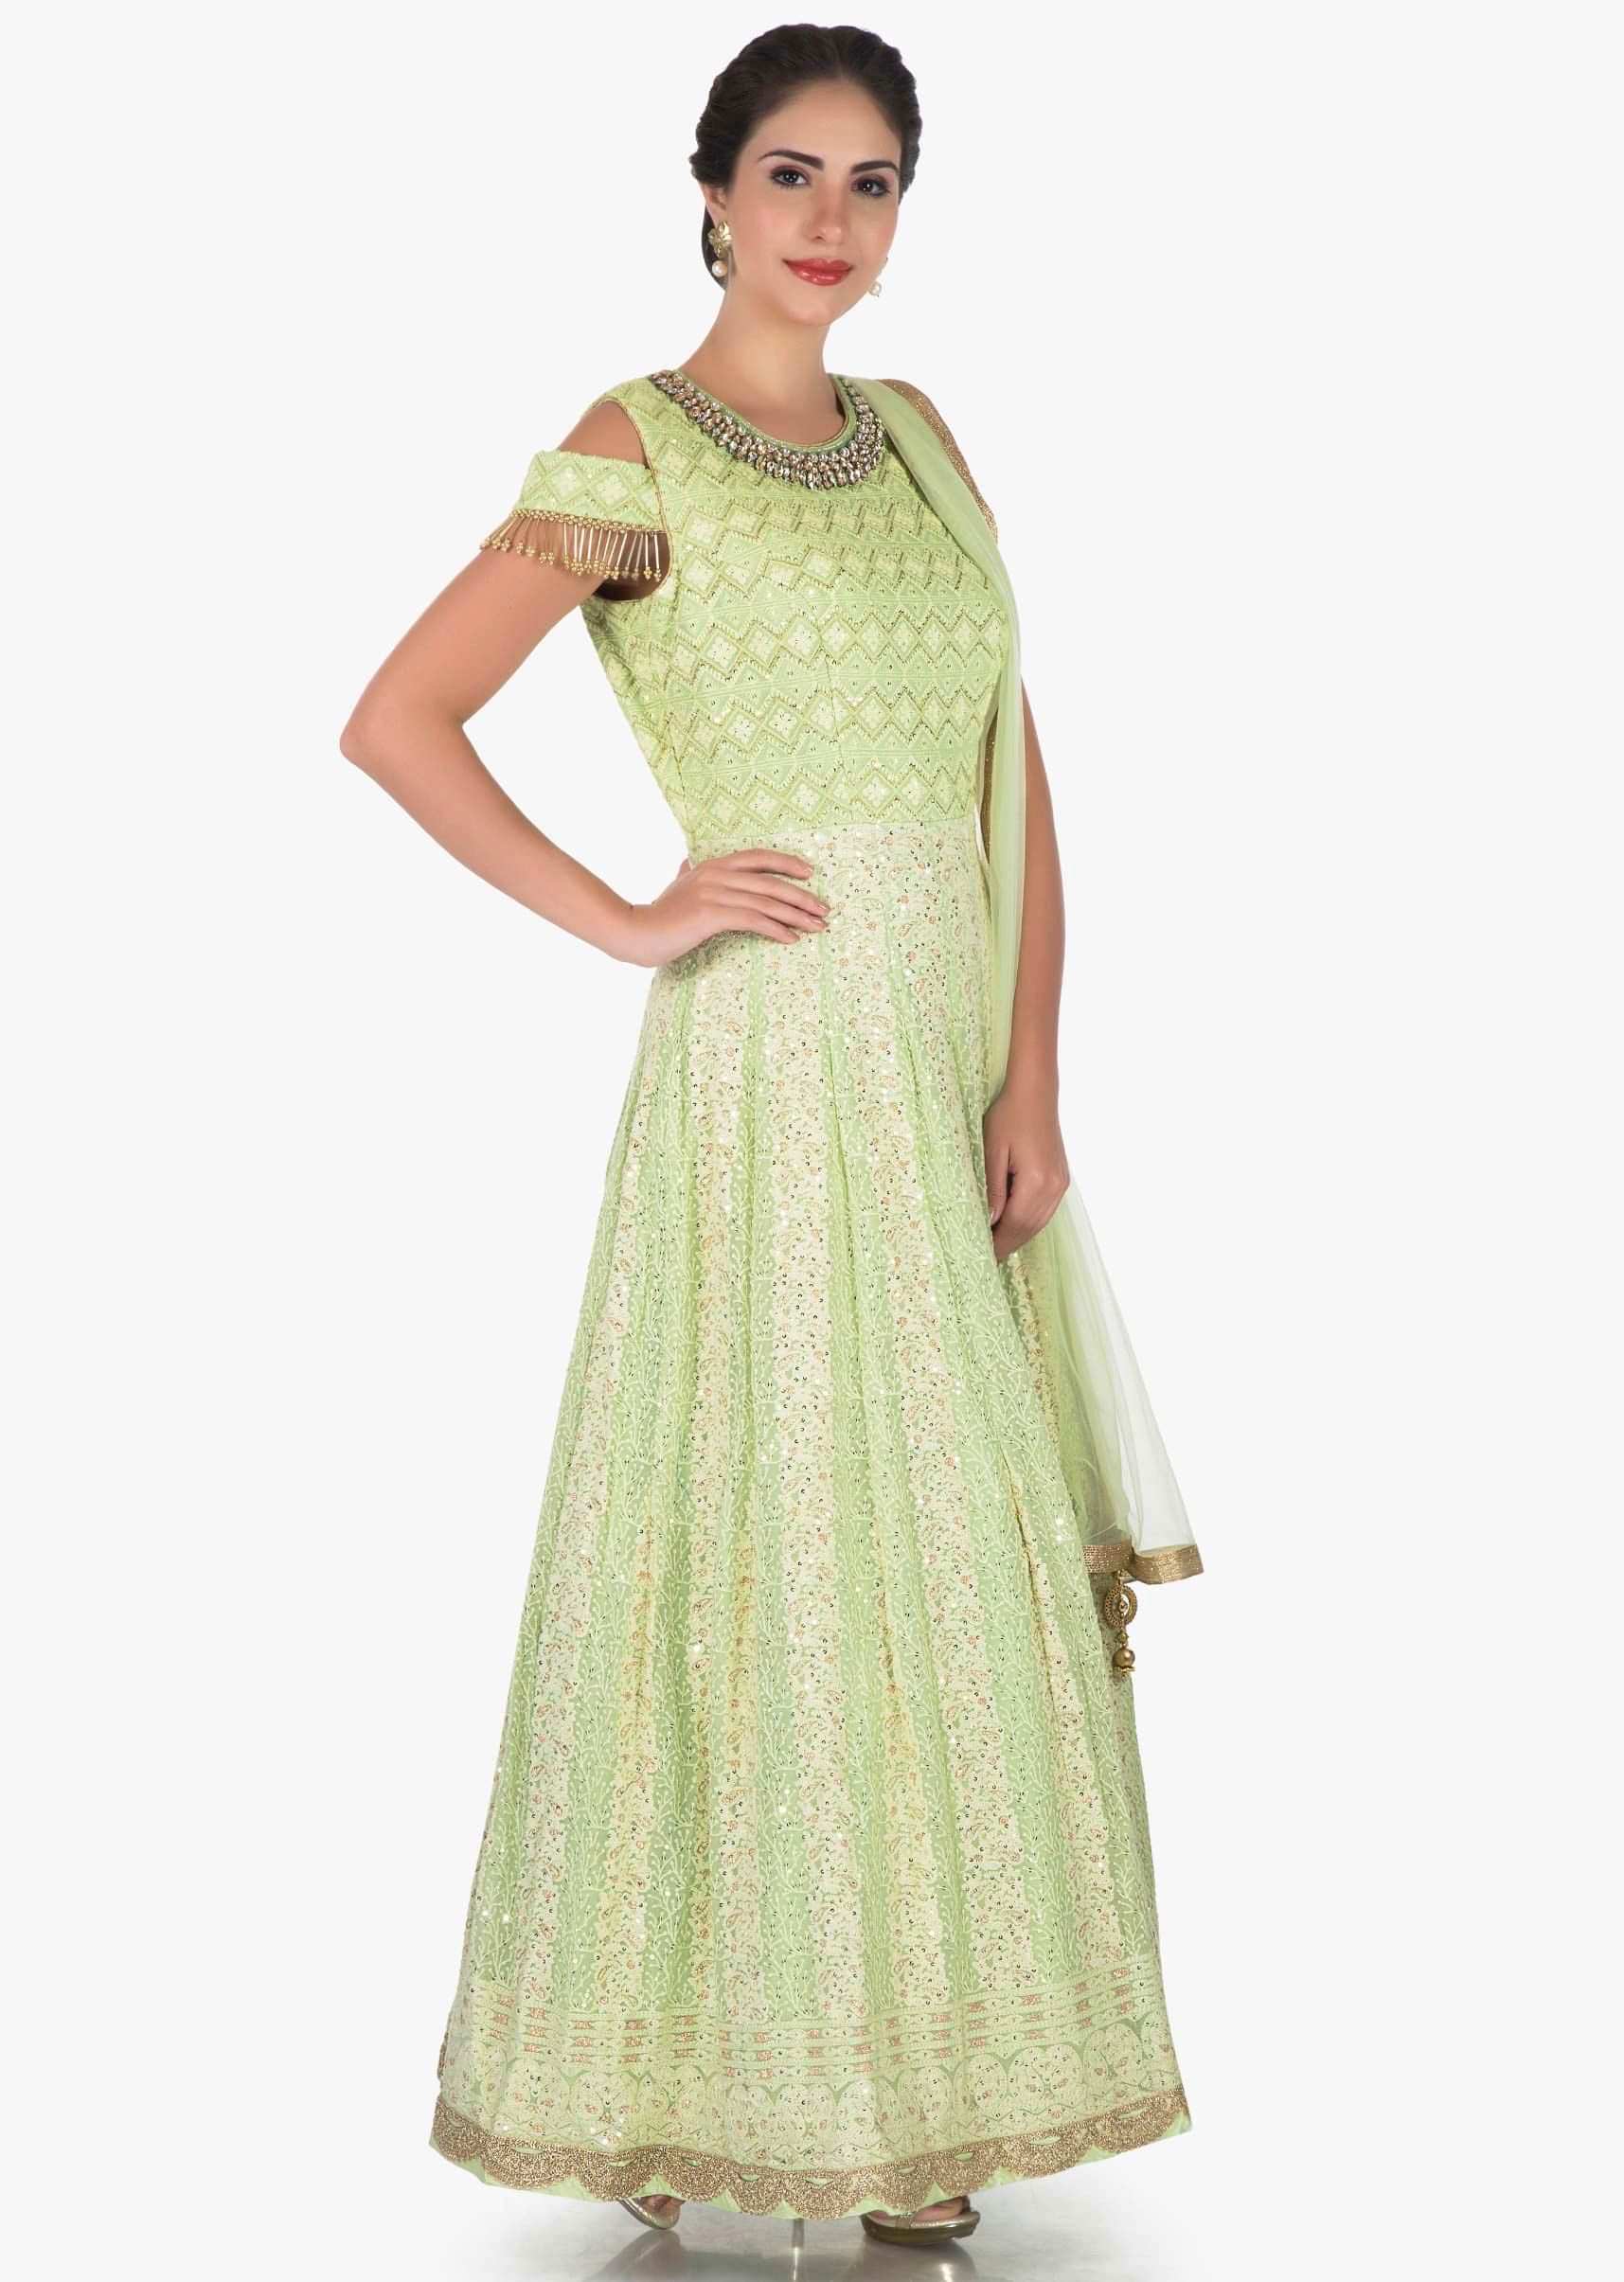 Pista Green Suit In Georgette Embellished In Heavy Stone And Tassel Embroidery Work Online - Kalki Fashion